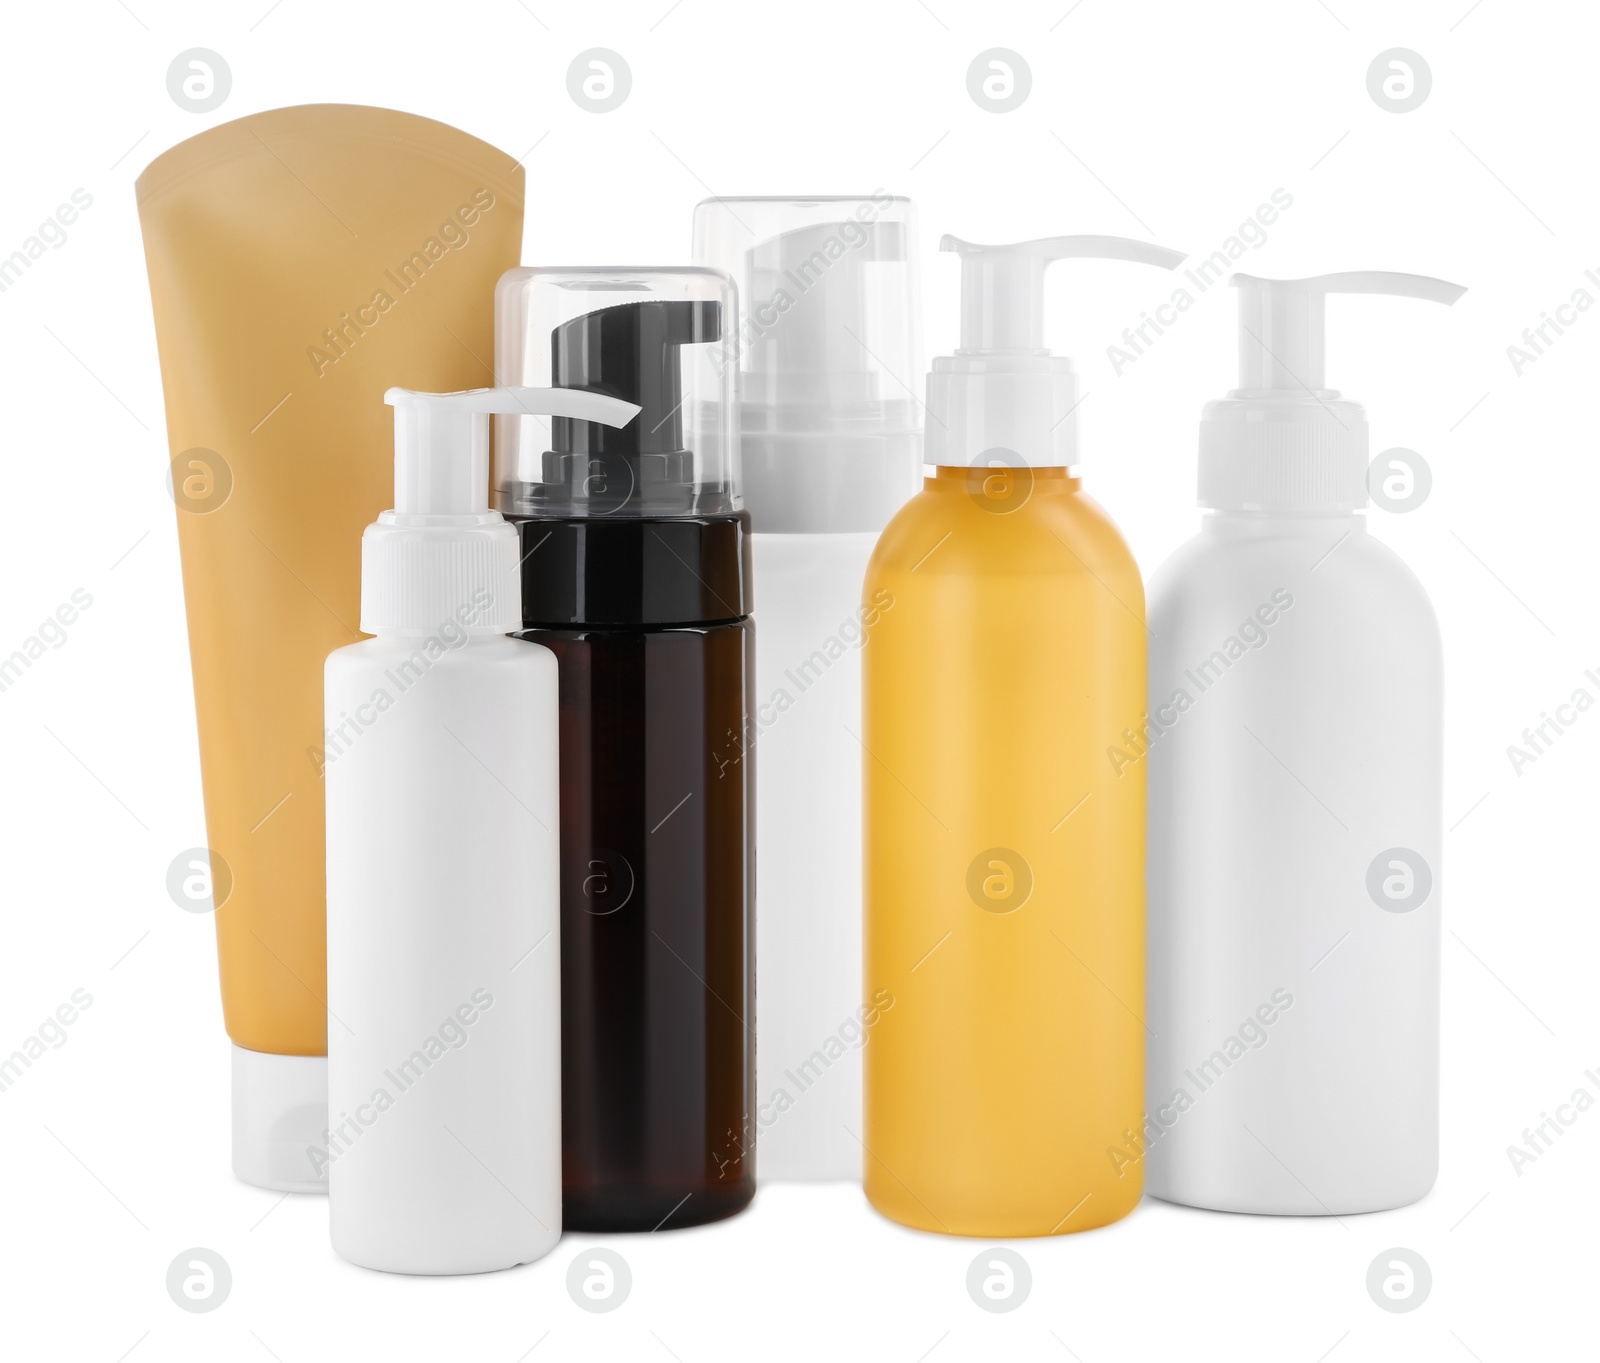 Photo of Different face cleansing products isolated on white